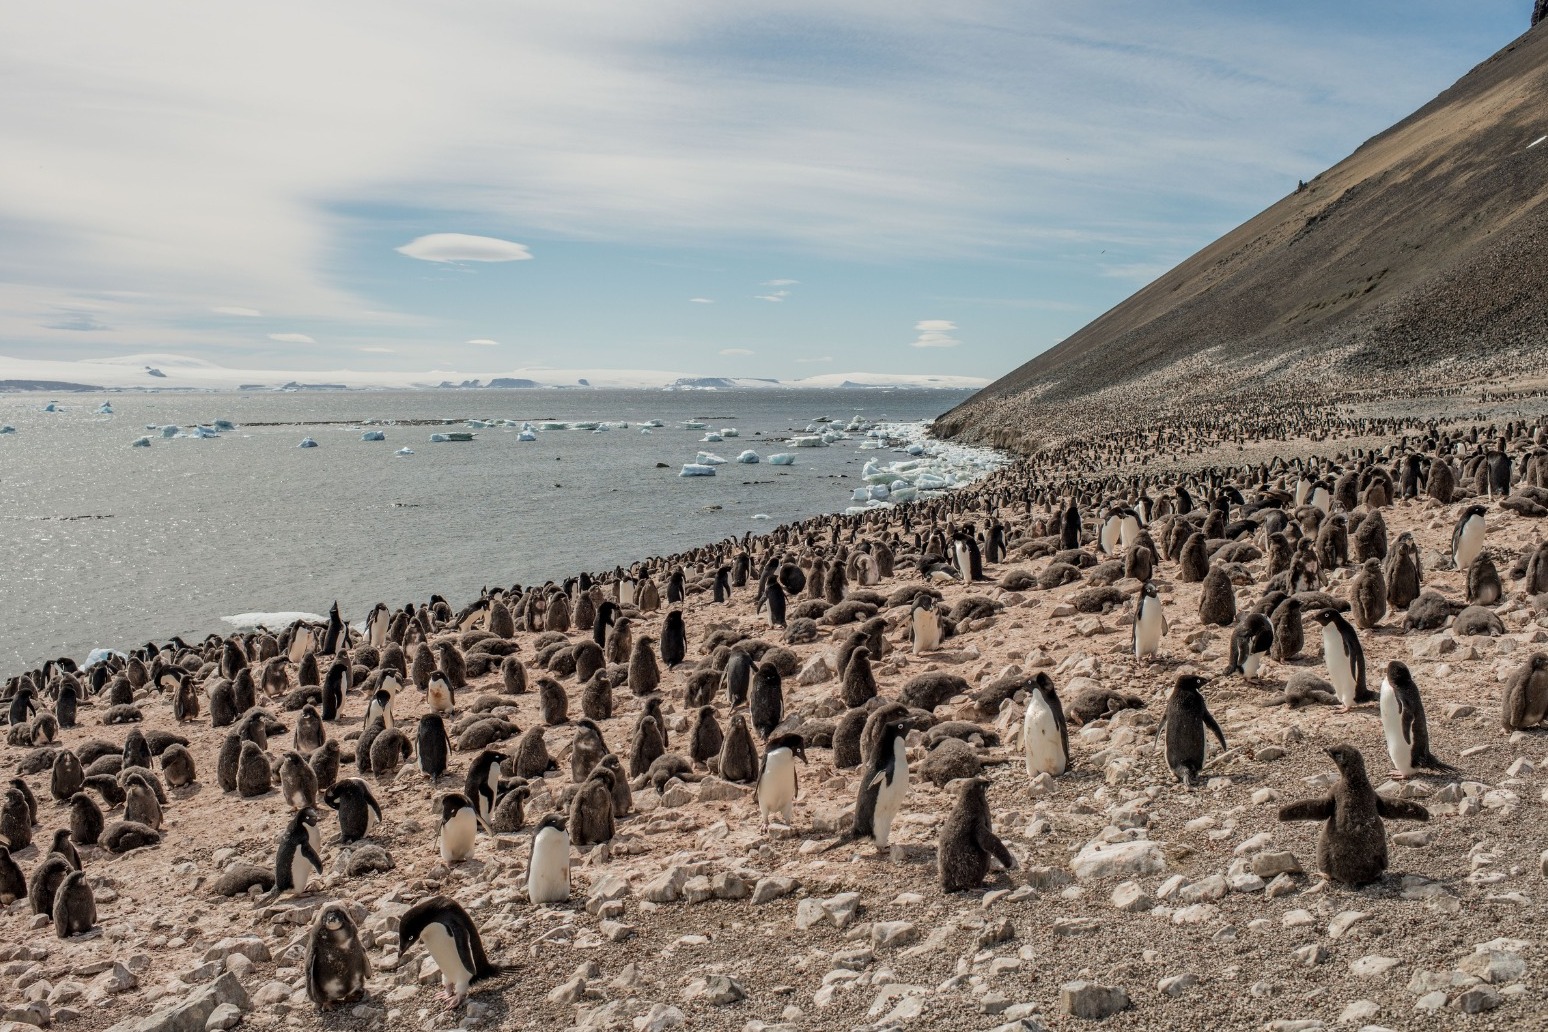 Staff wanted to watch penguins and run gift shop in Antarctica 